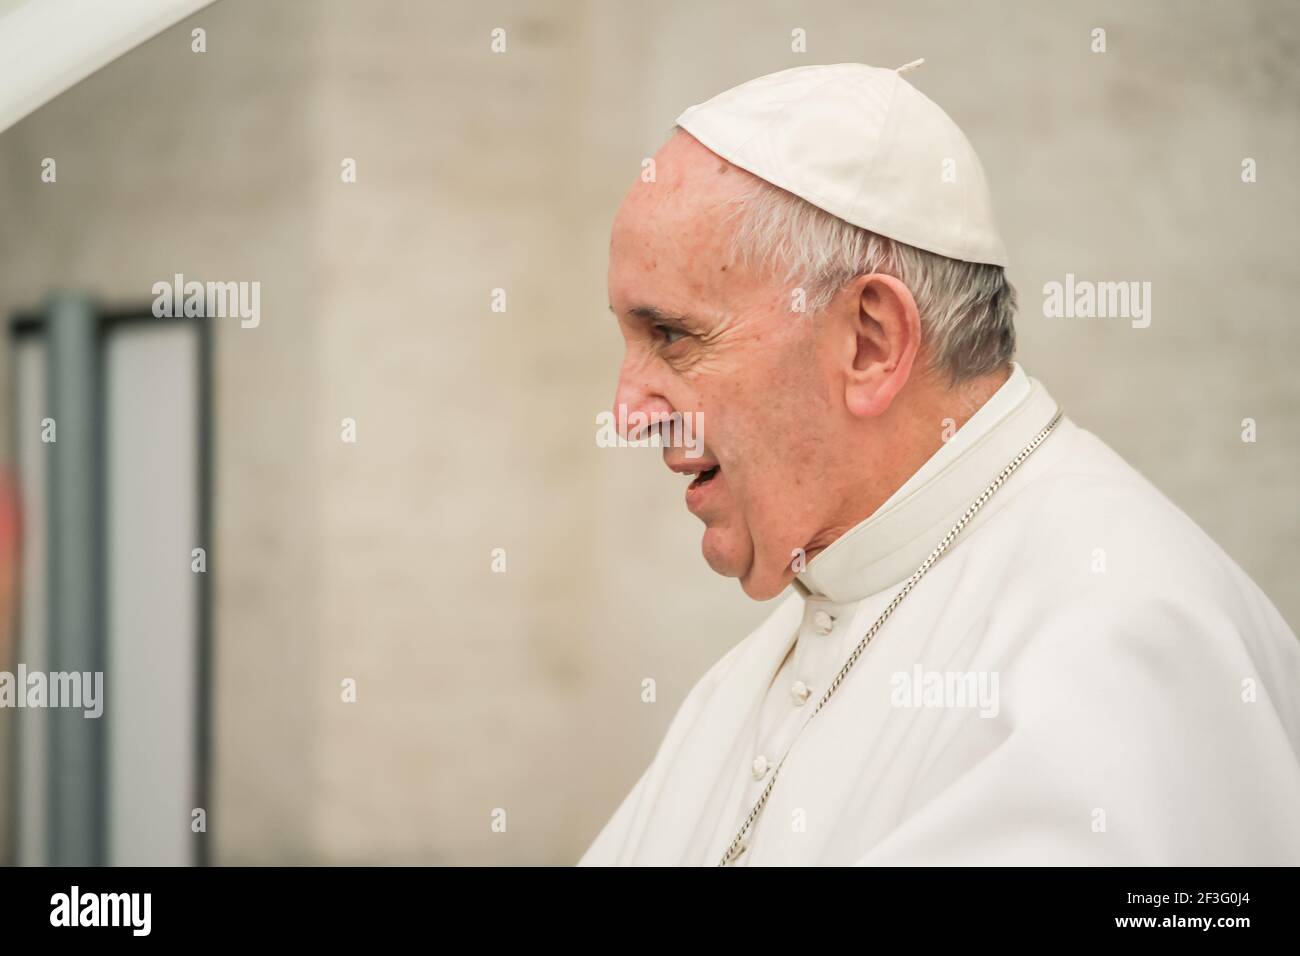 Vatican City, Vatican. February 3, 2016. Portrait of Pope Francis, Jorge Bergoglio, during the tour of St. Peter's Square. Stock Photo